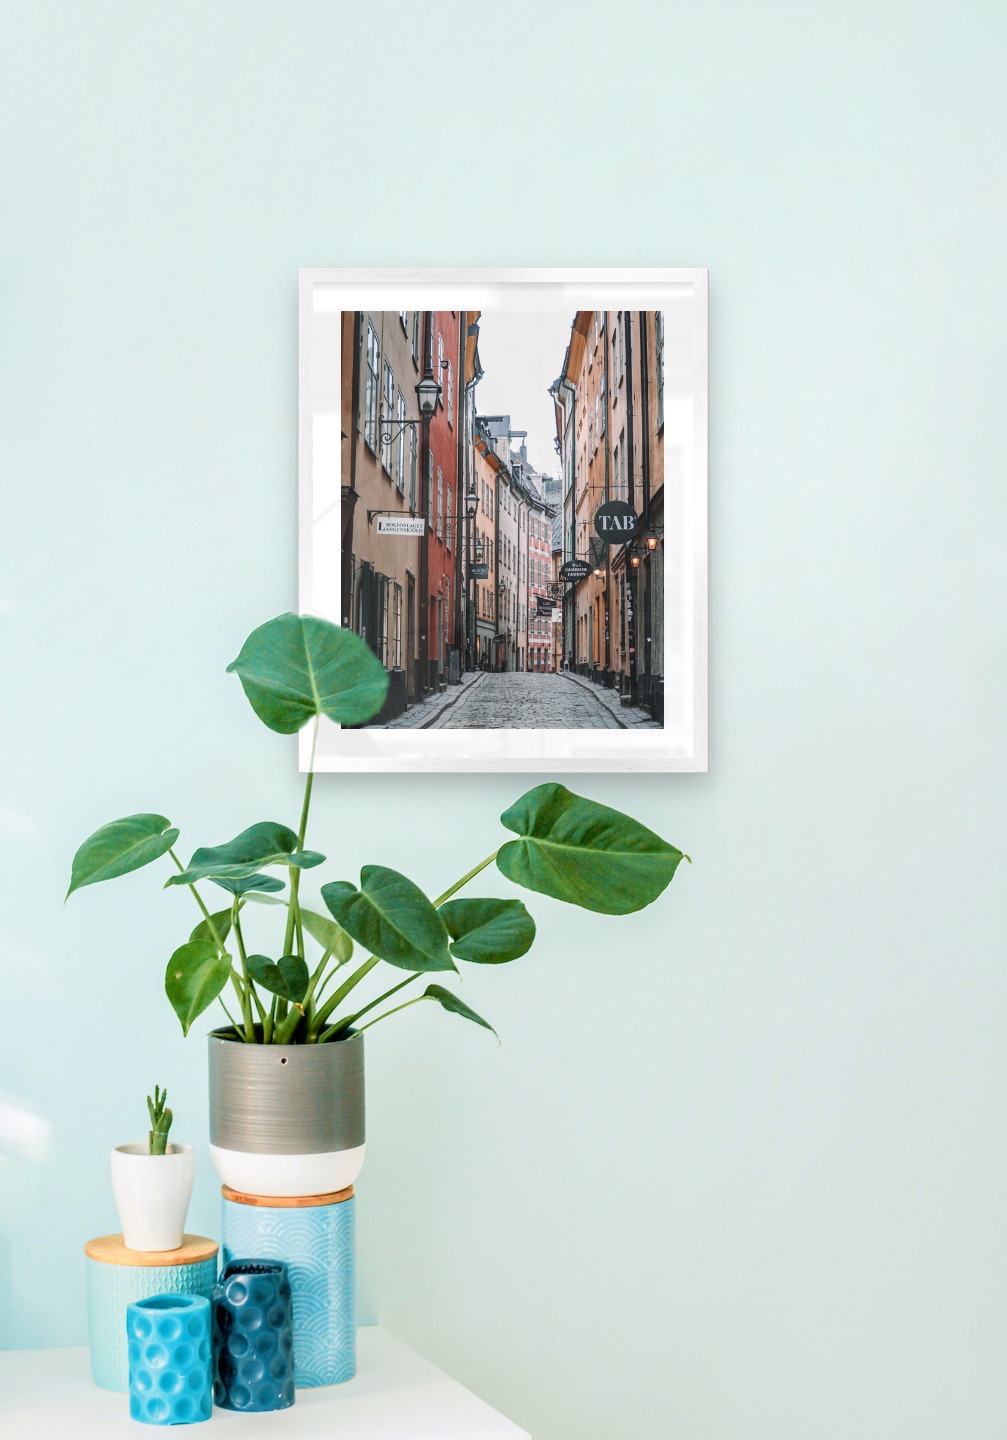 Gallery wall with picture frame in silver in size 40x50 with print "Old town in Stockholm"